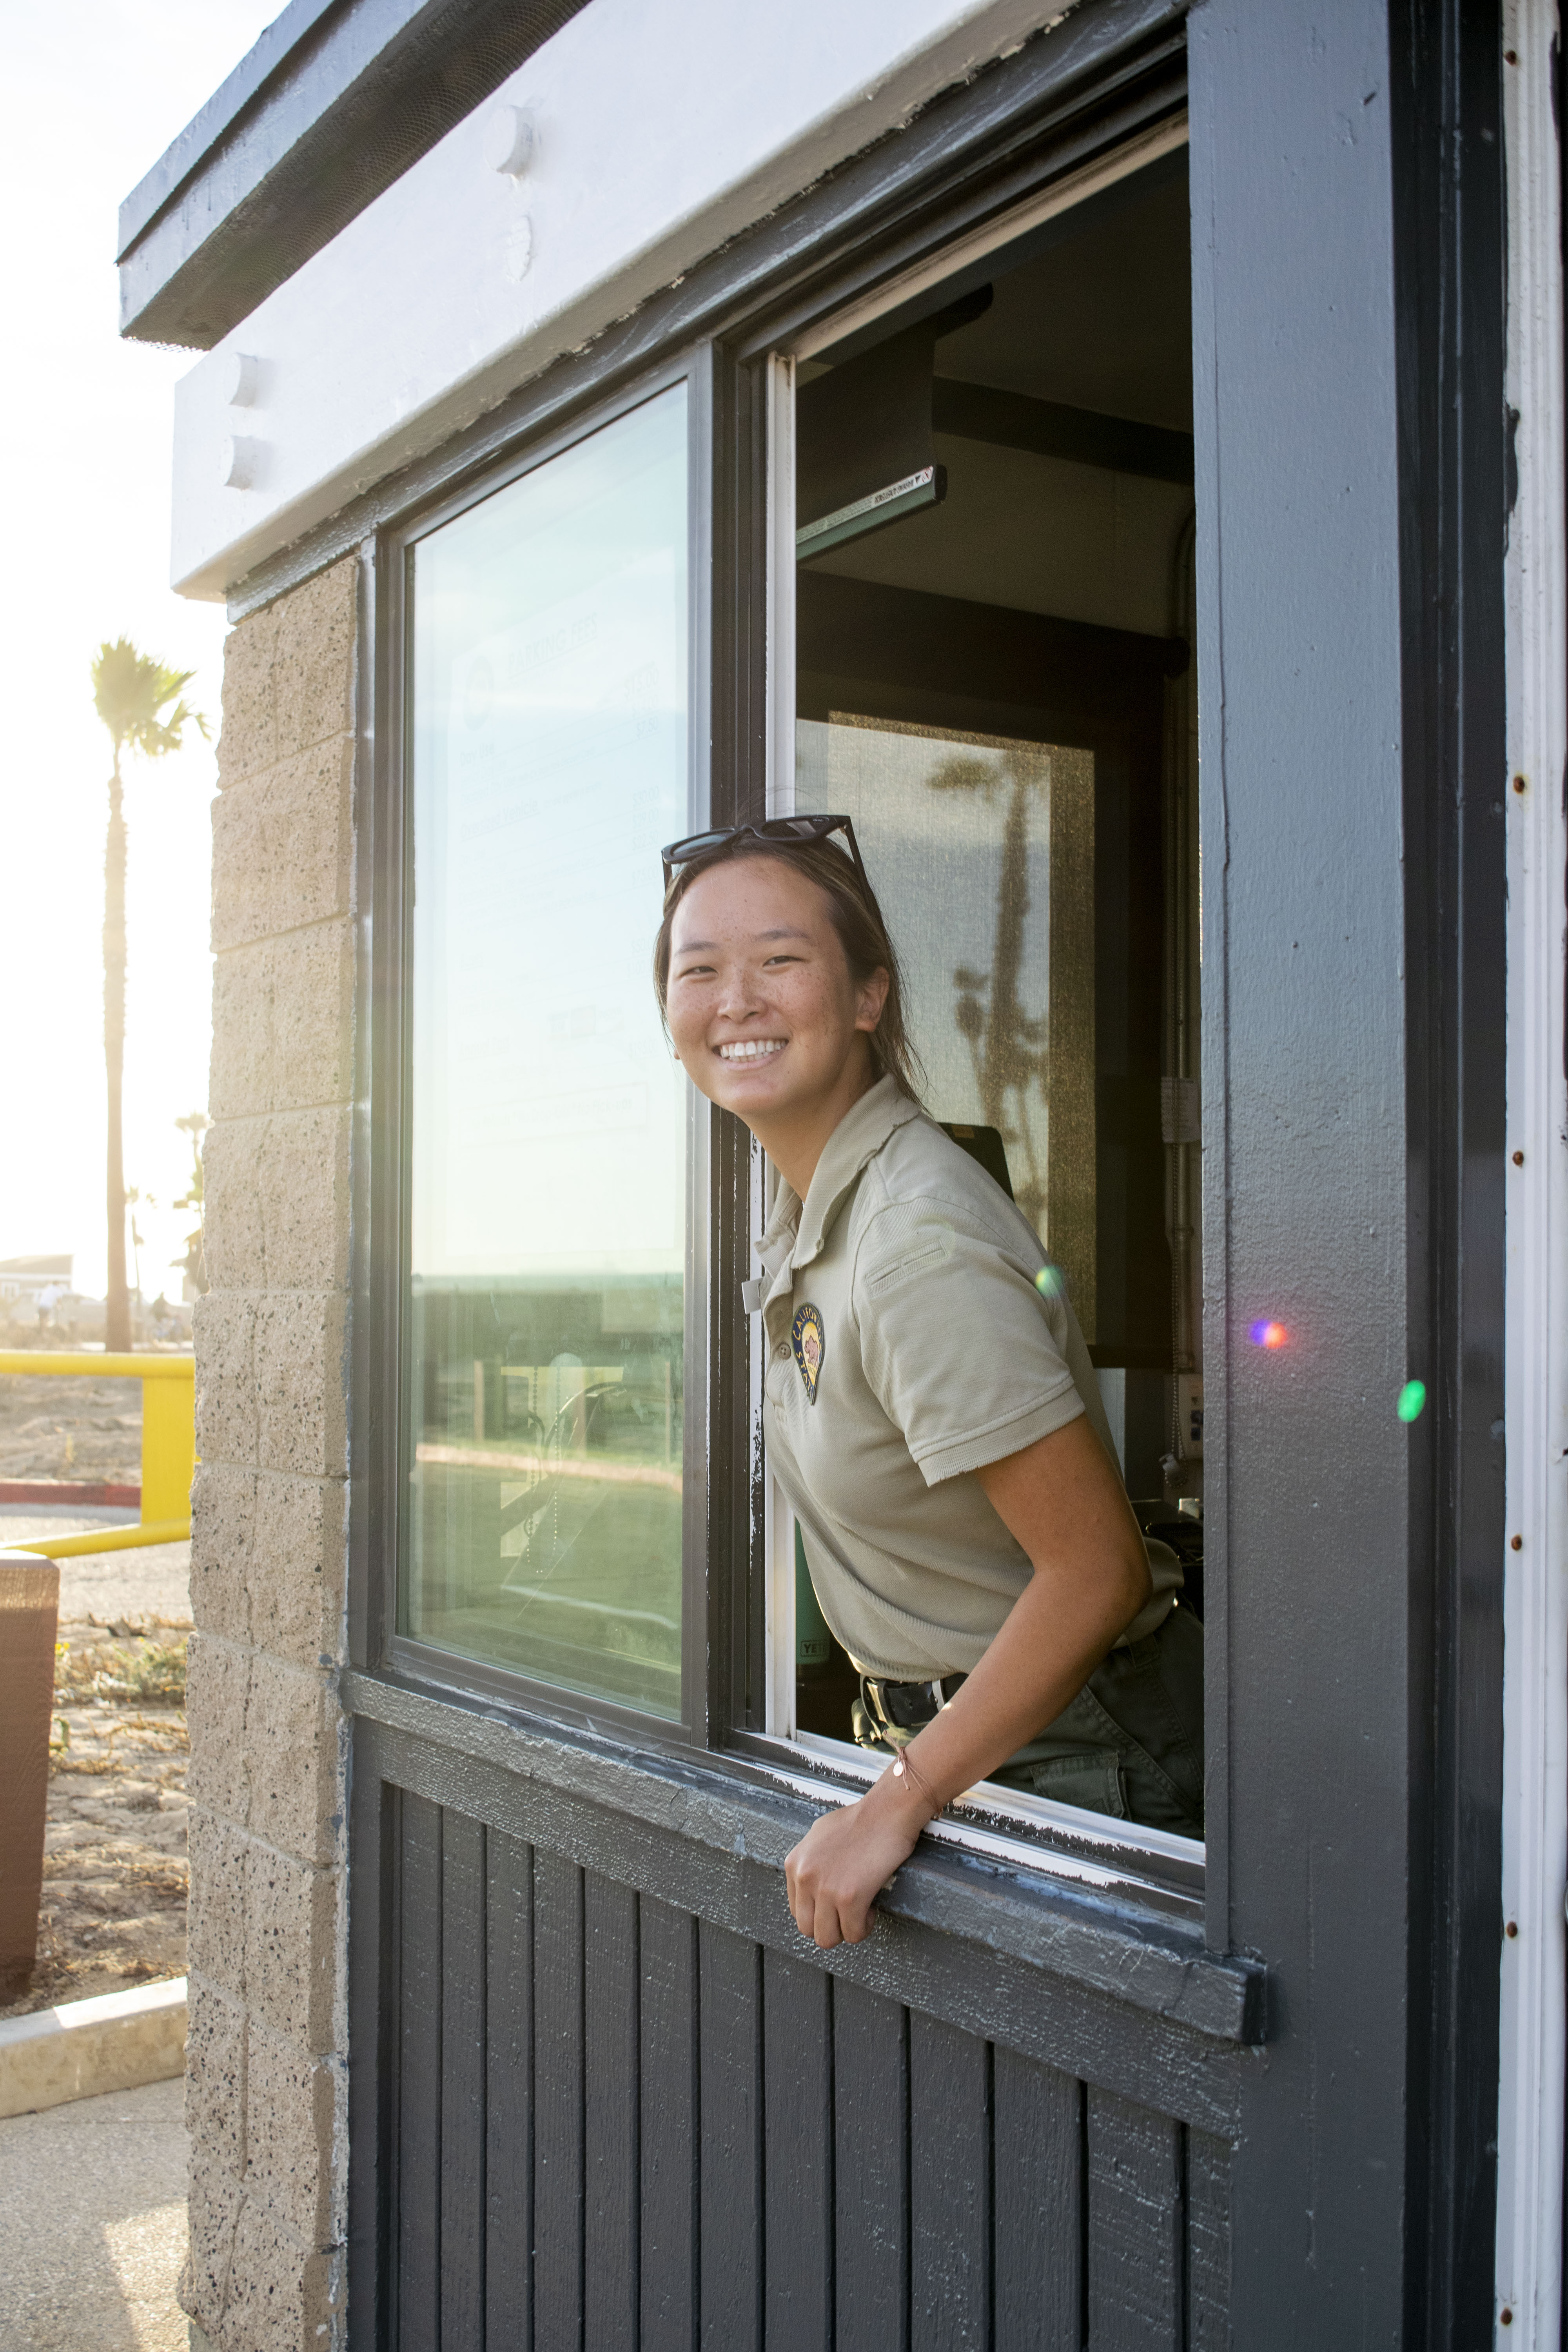 Park Aide at Huntington State Beach leans out of the kiosk window to greet guests